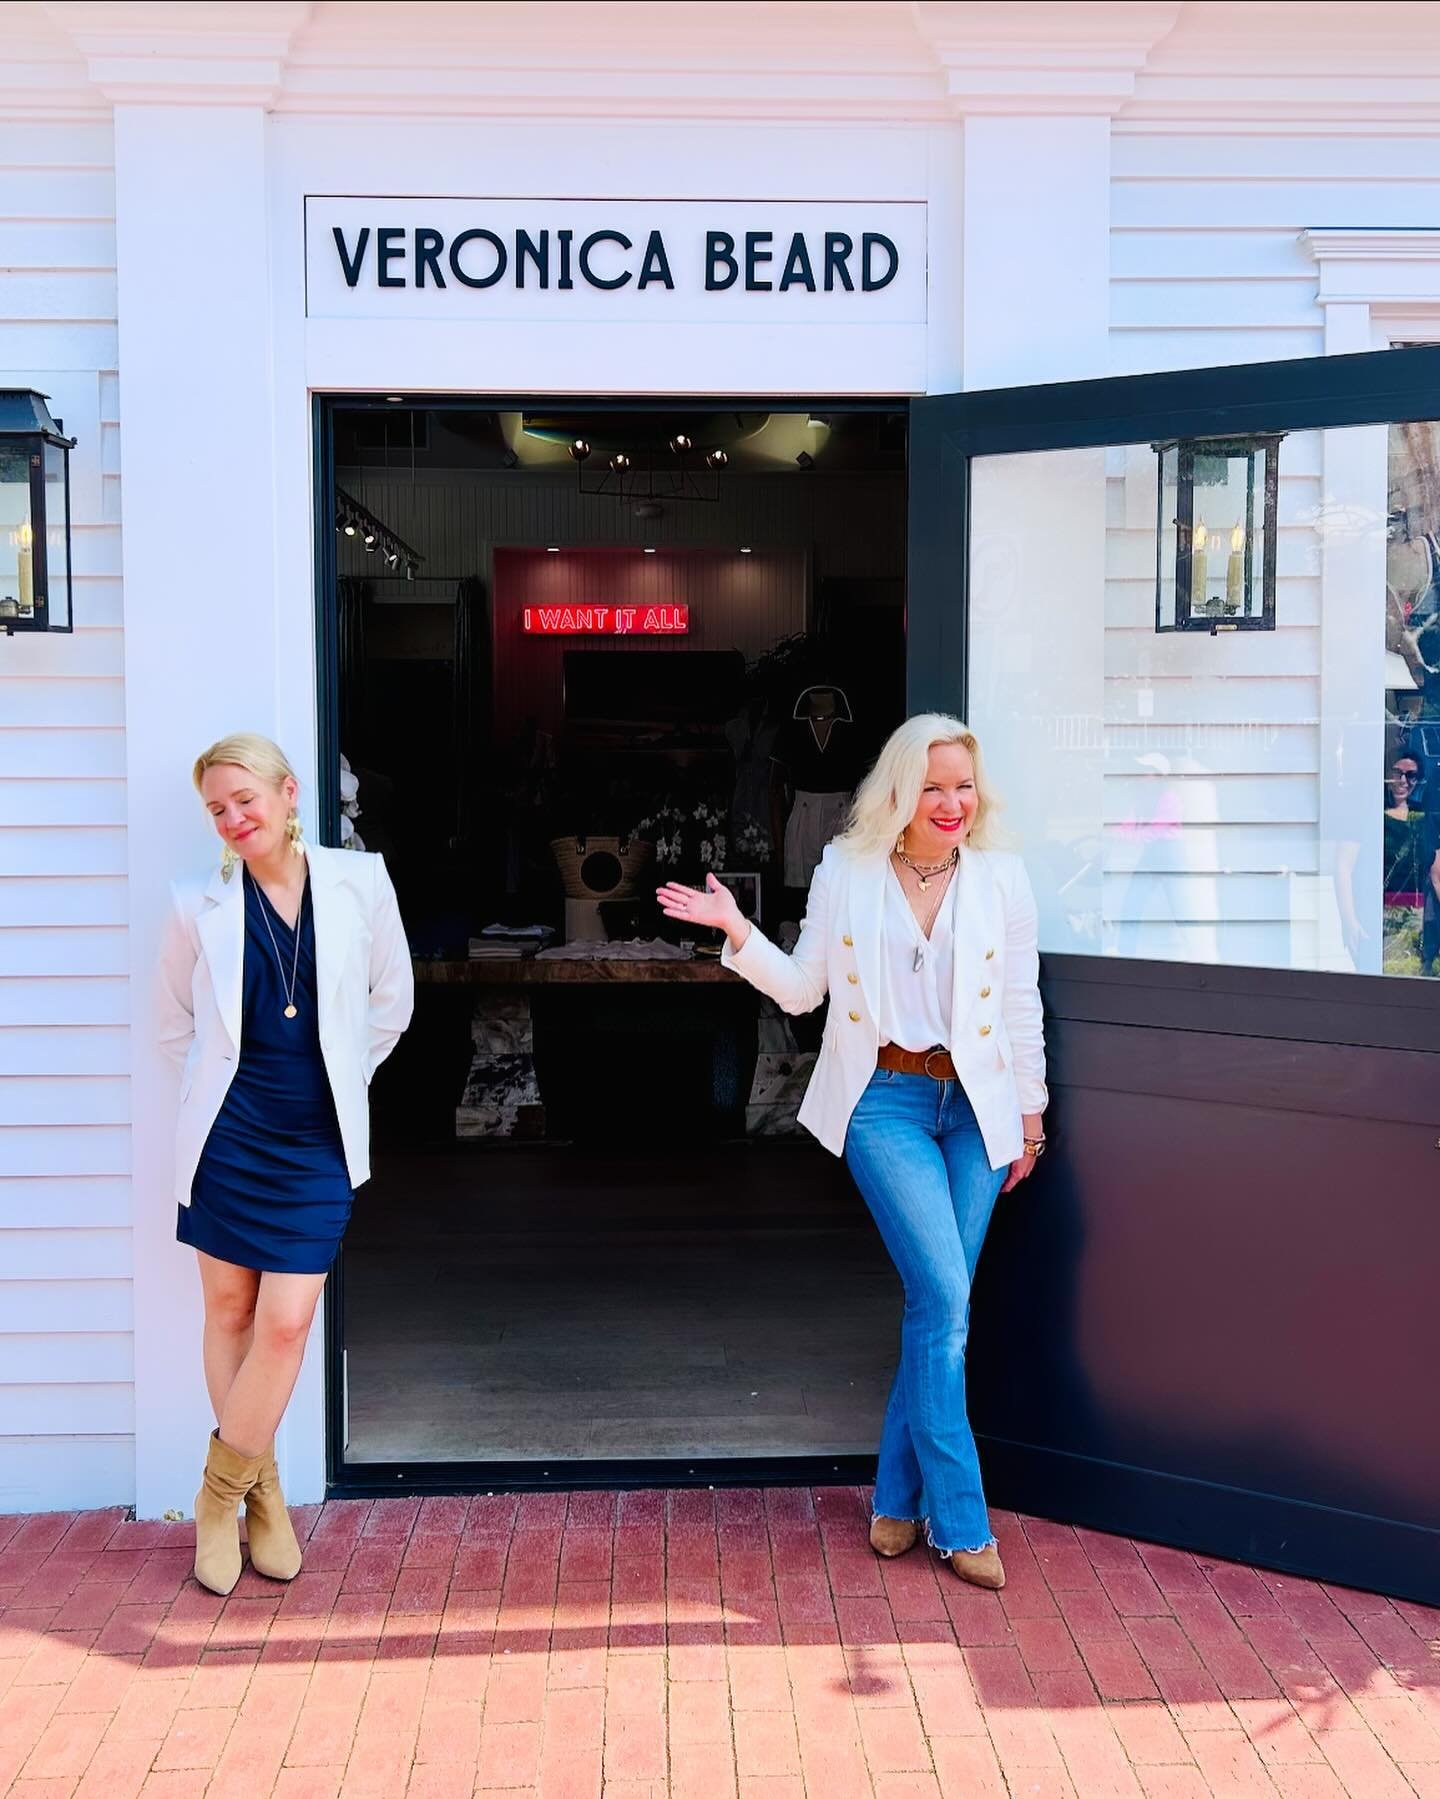 Our perfume event at @veronicabeard in LA was so much fun and a big success benefiting @pennysflight! Go by this weekend to experience the perfumes - the only place in LA currently that has them in person. Tag us in a pic with you and your bottle of 